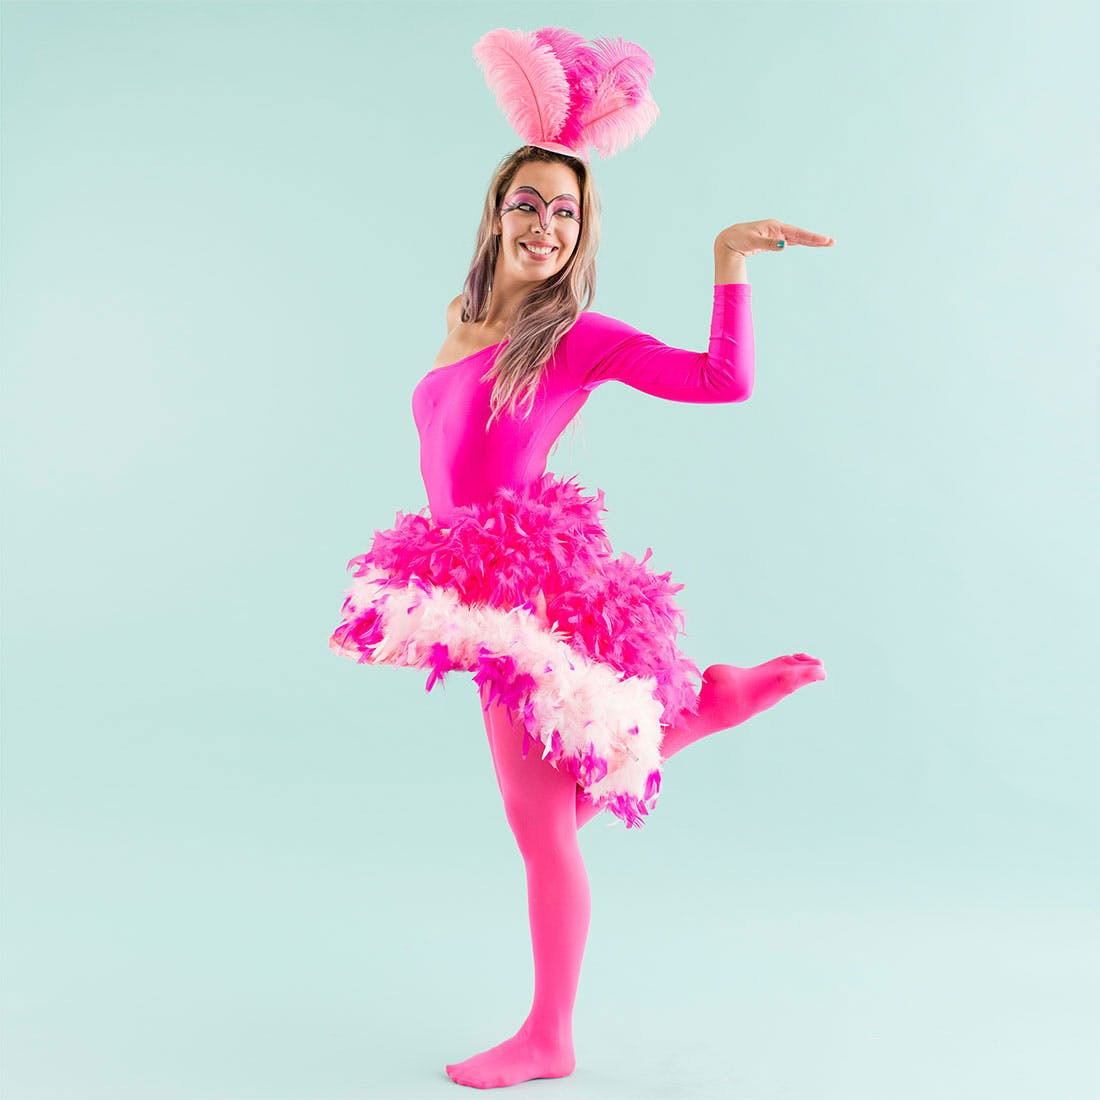 DIY Flamingo Costumes
 This Tutorial Will Make You Want to Be a Flamingo for